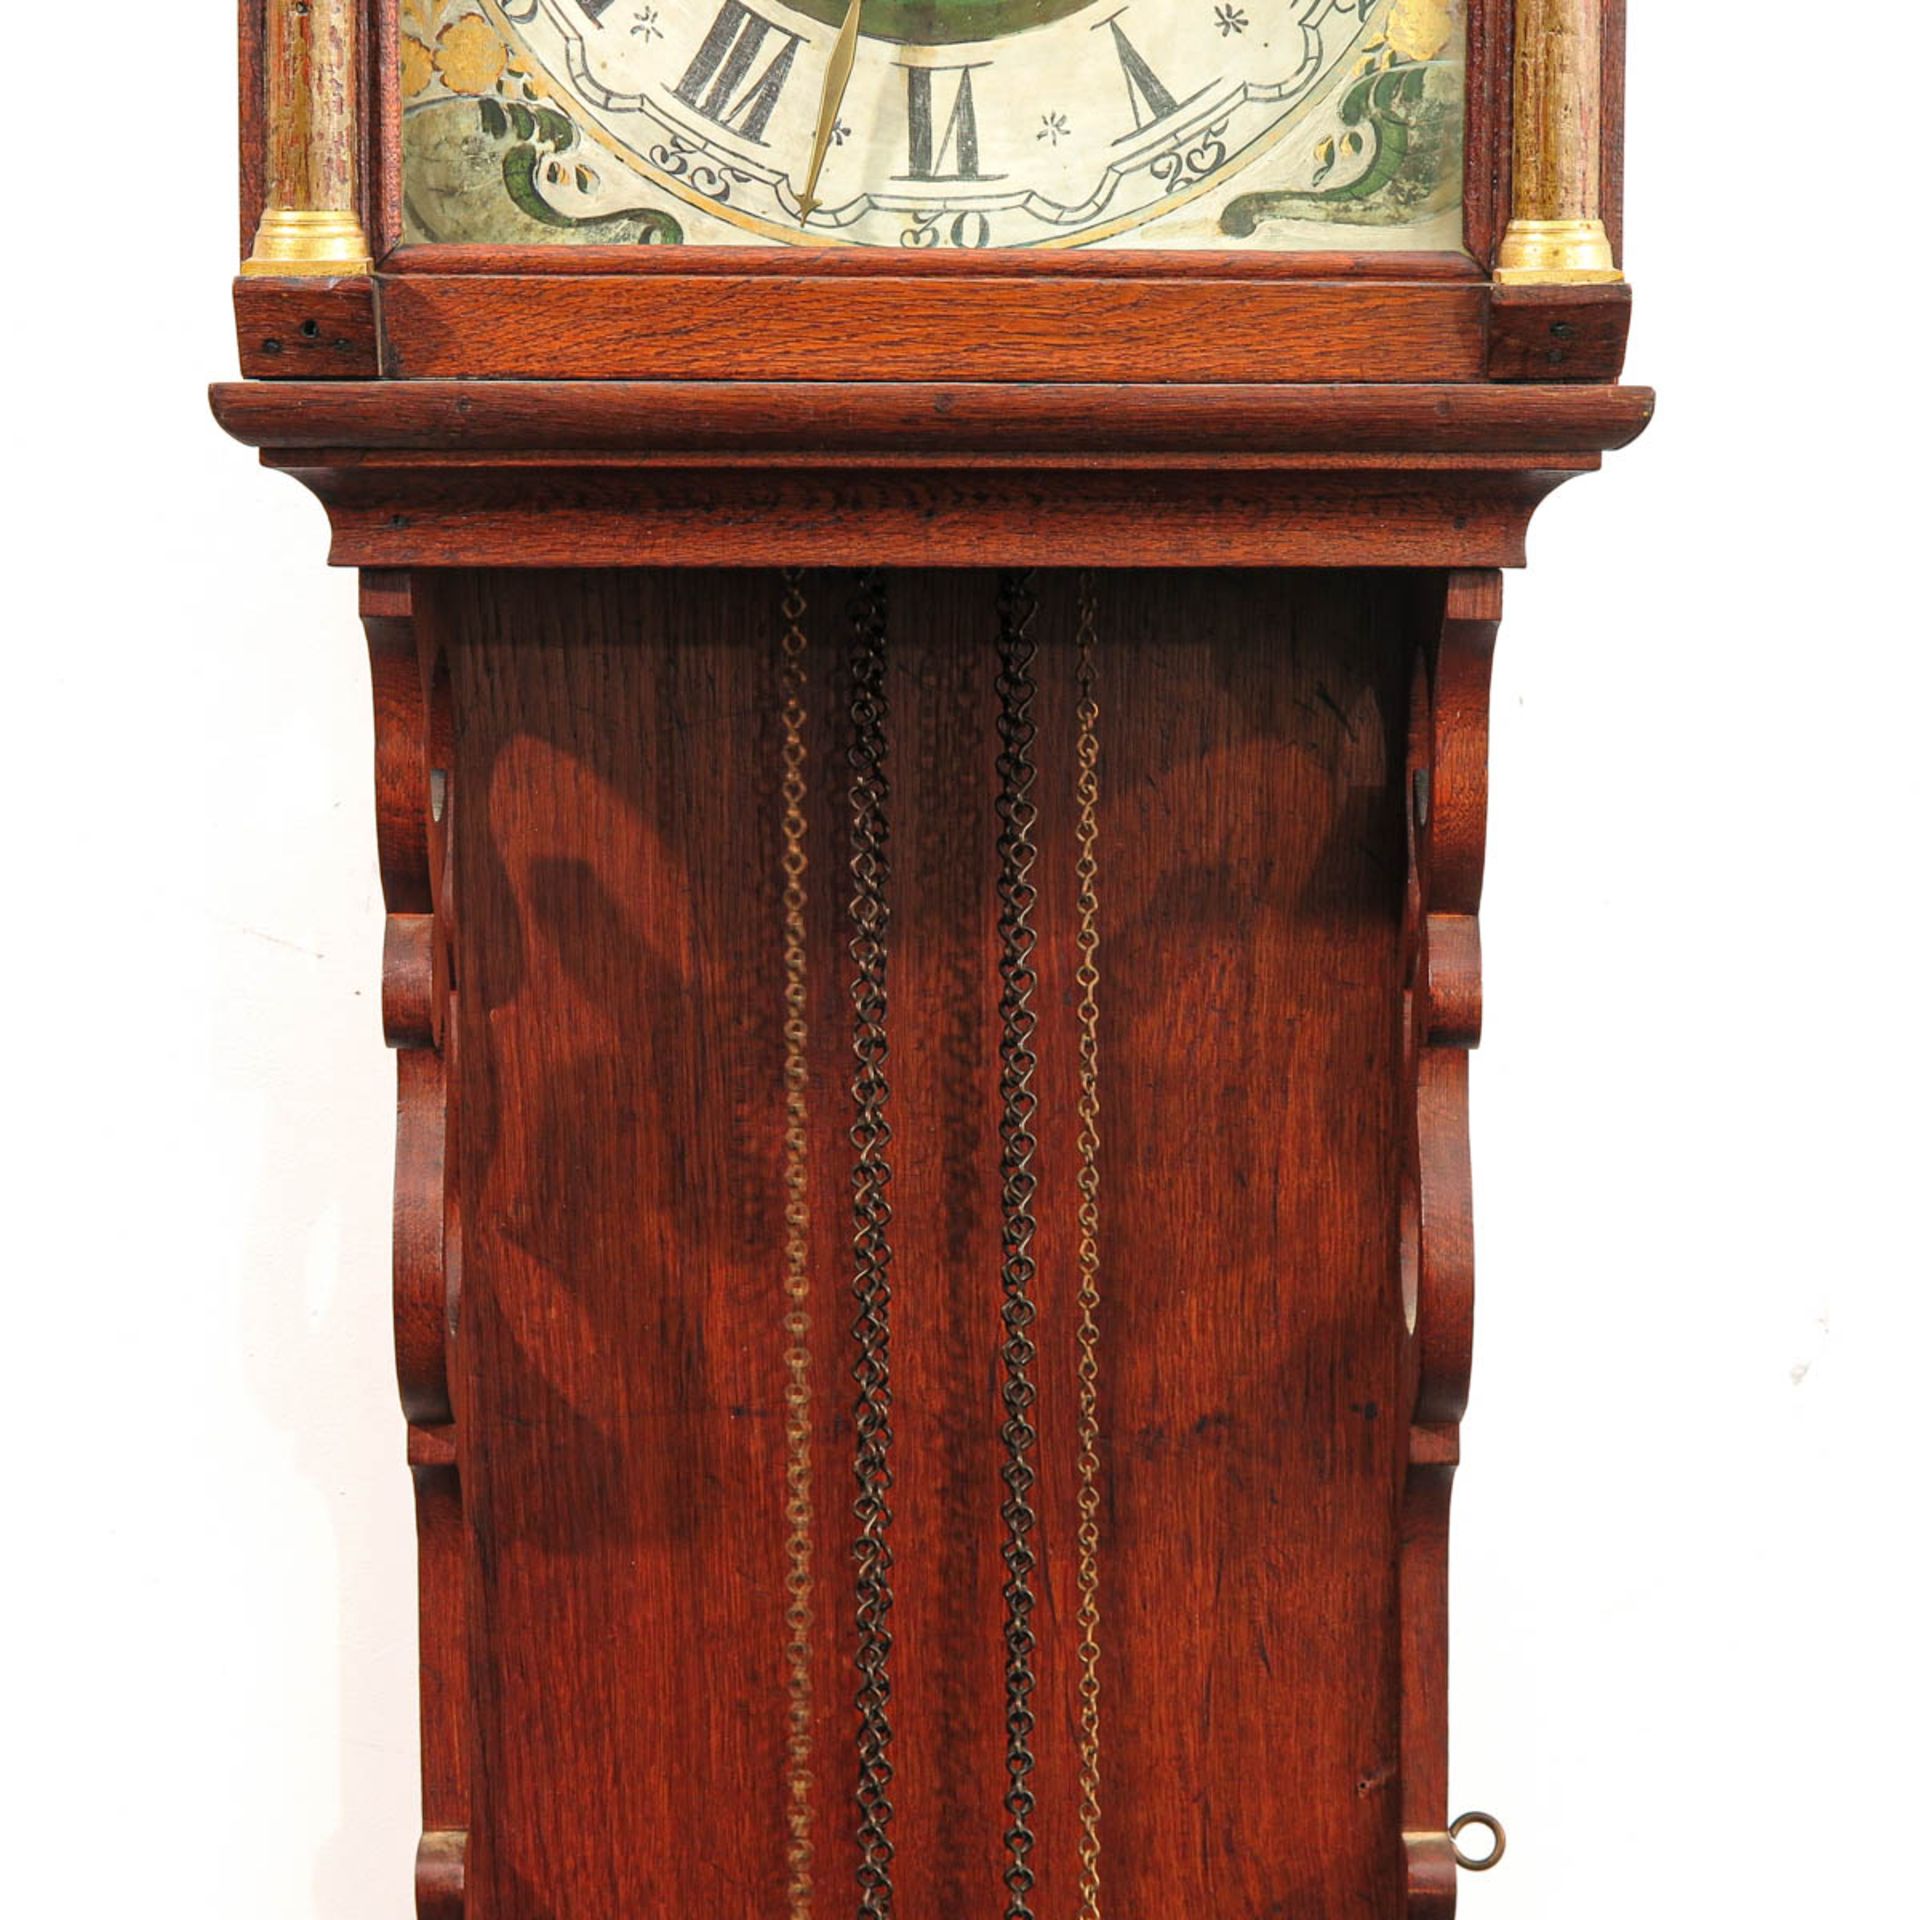 A 19th Century Friesland Wall Clock - Image 8 of 9